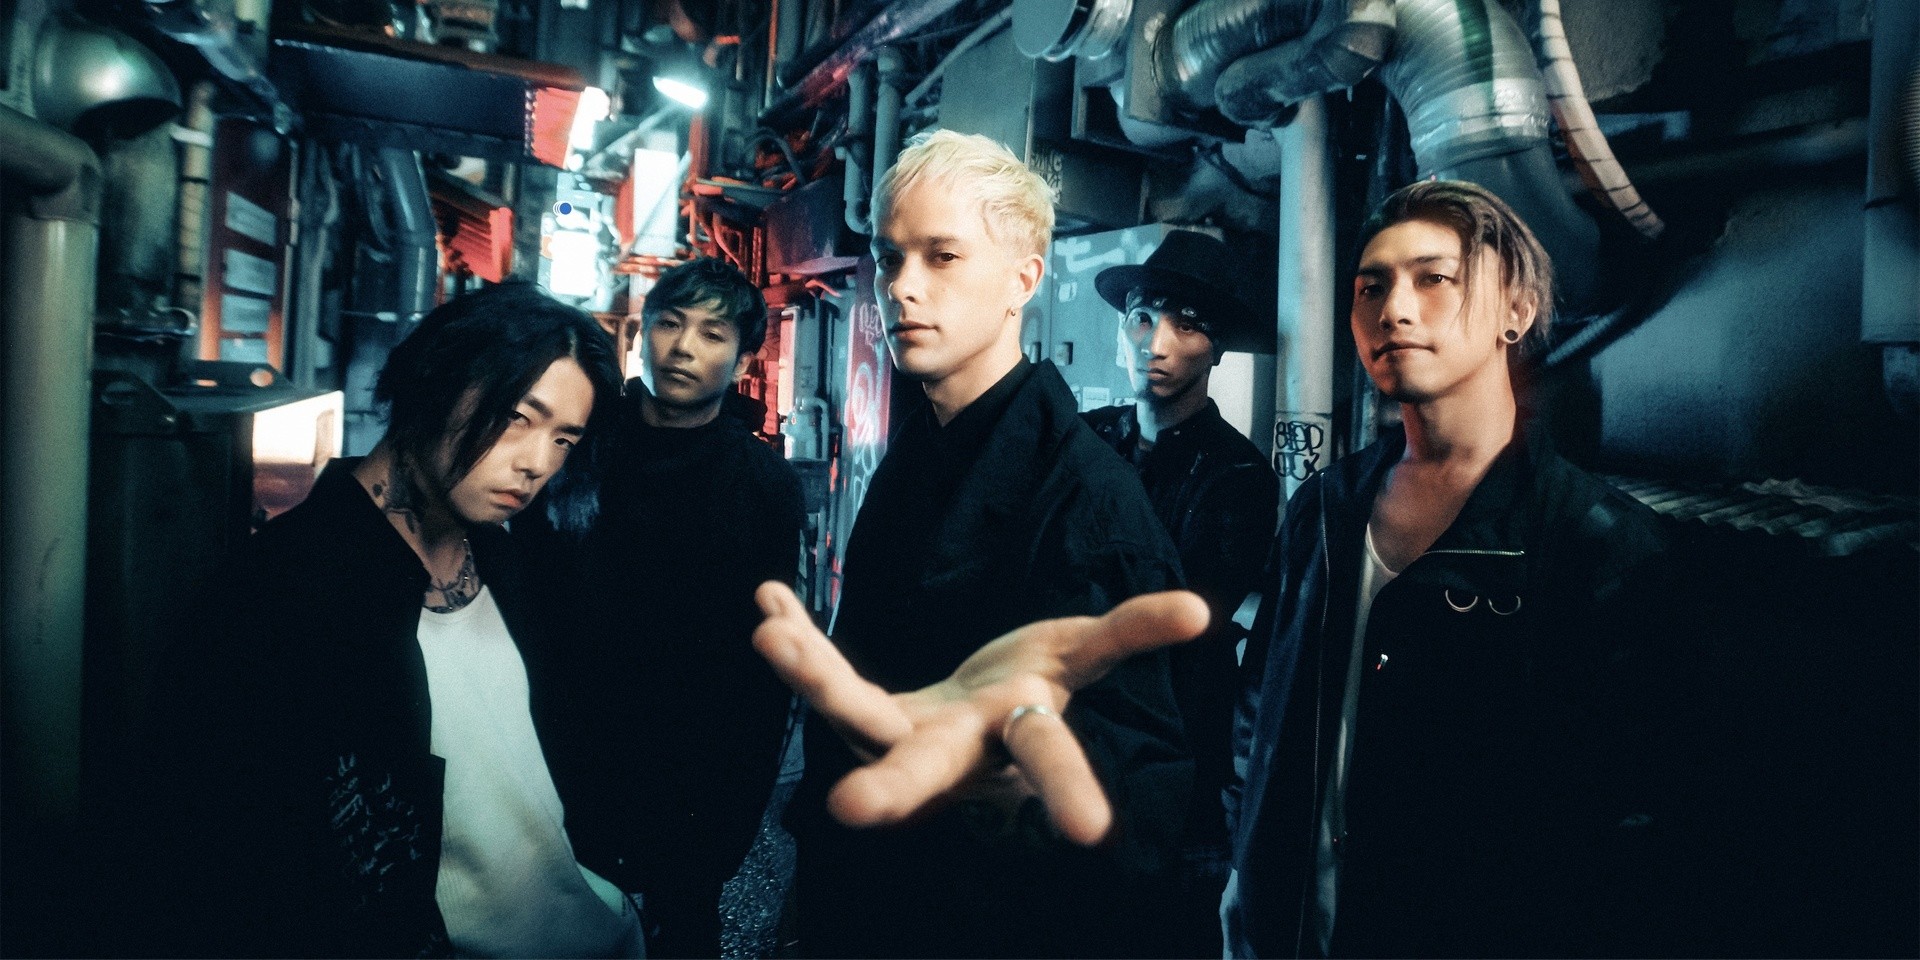 coldrain to hold online concert, here's how overseas fans can get discounted tickets